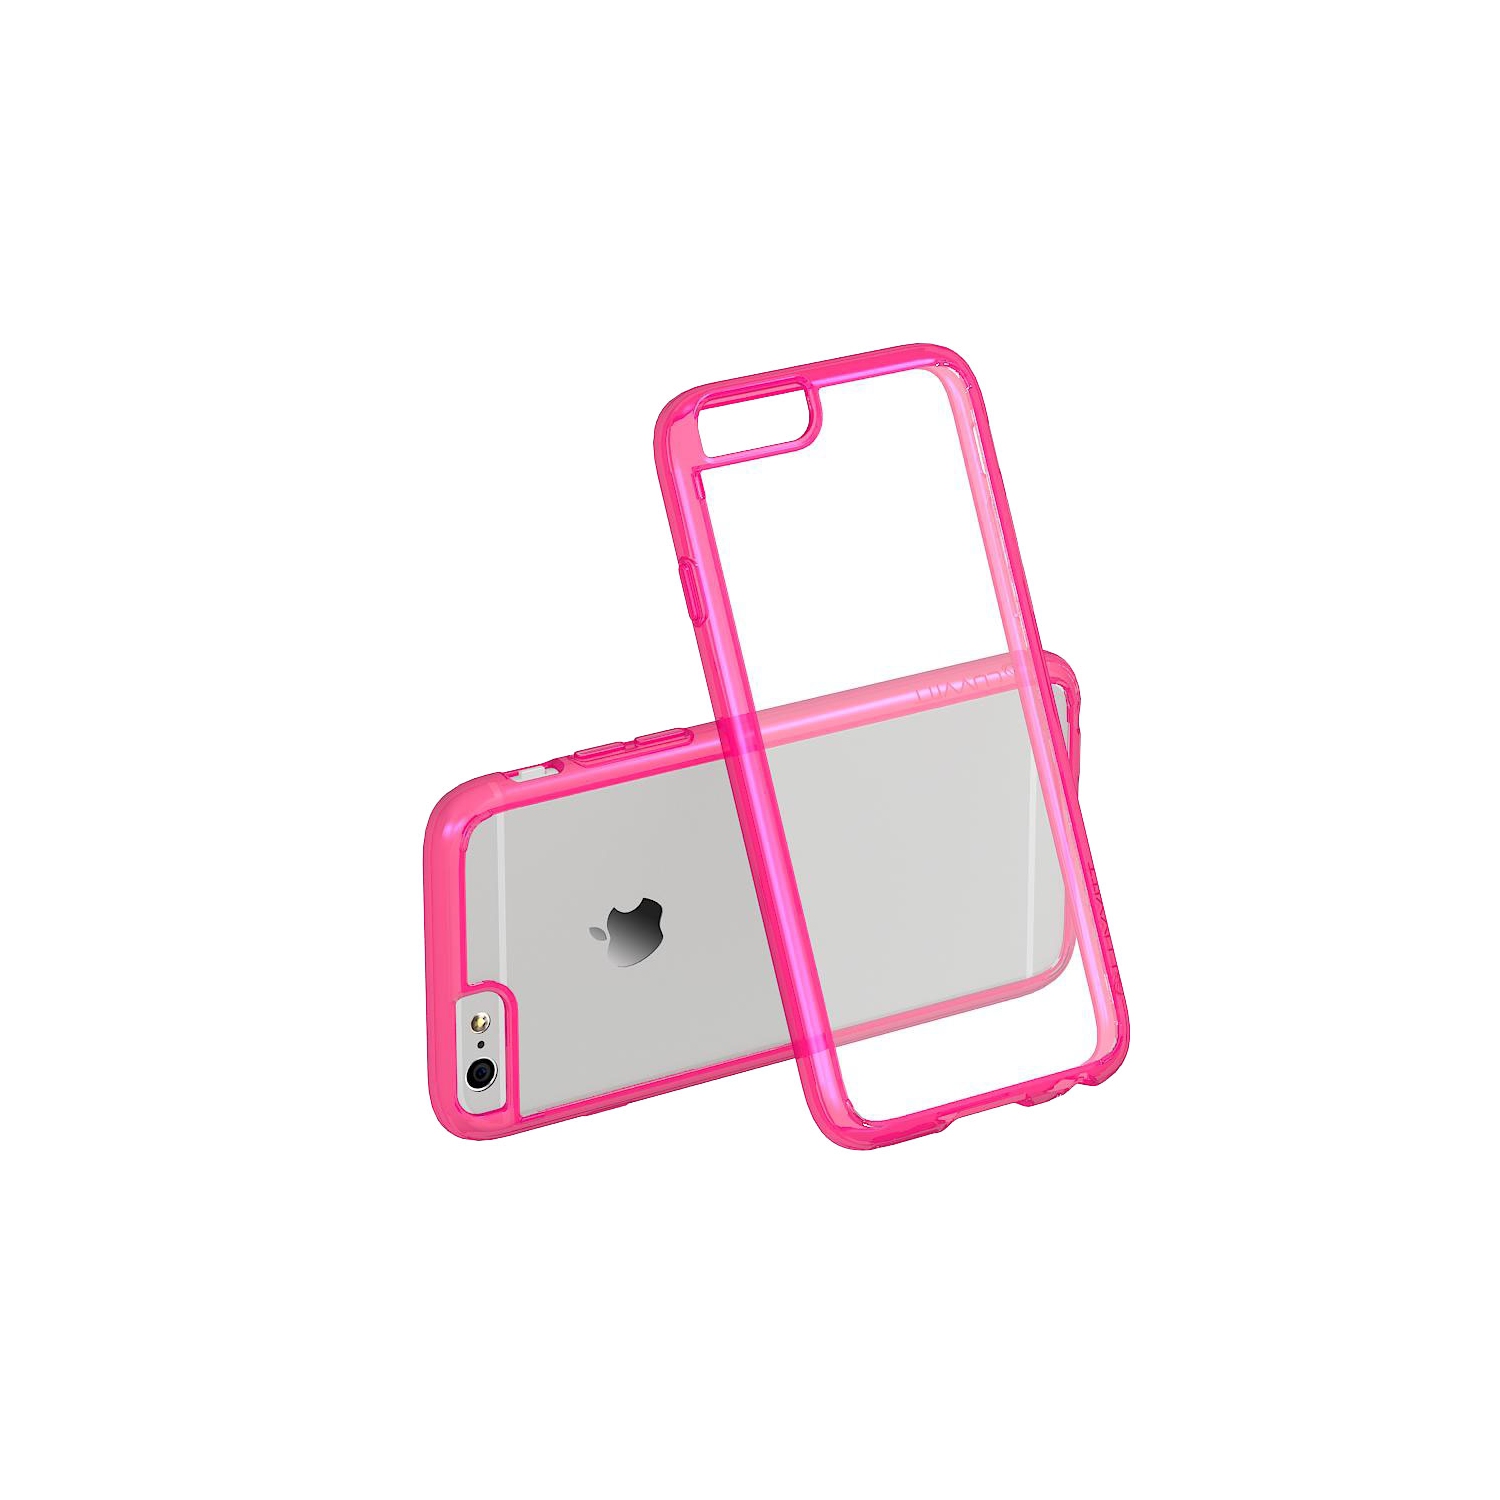 LUVVITT CLEARVIEW Case for iPhone 6 / 6S | Back Cover for iPhone 6 / 6S - Clear